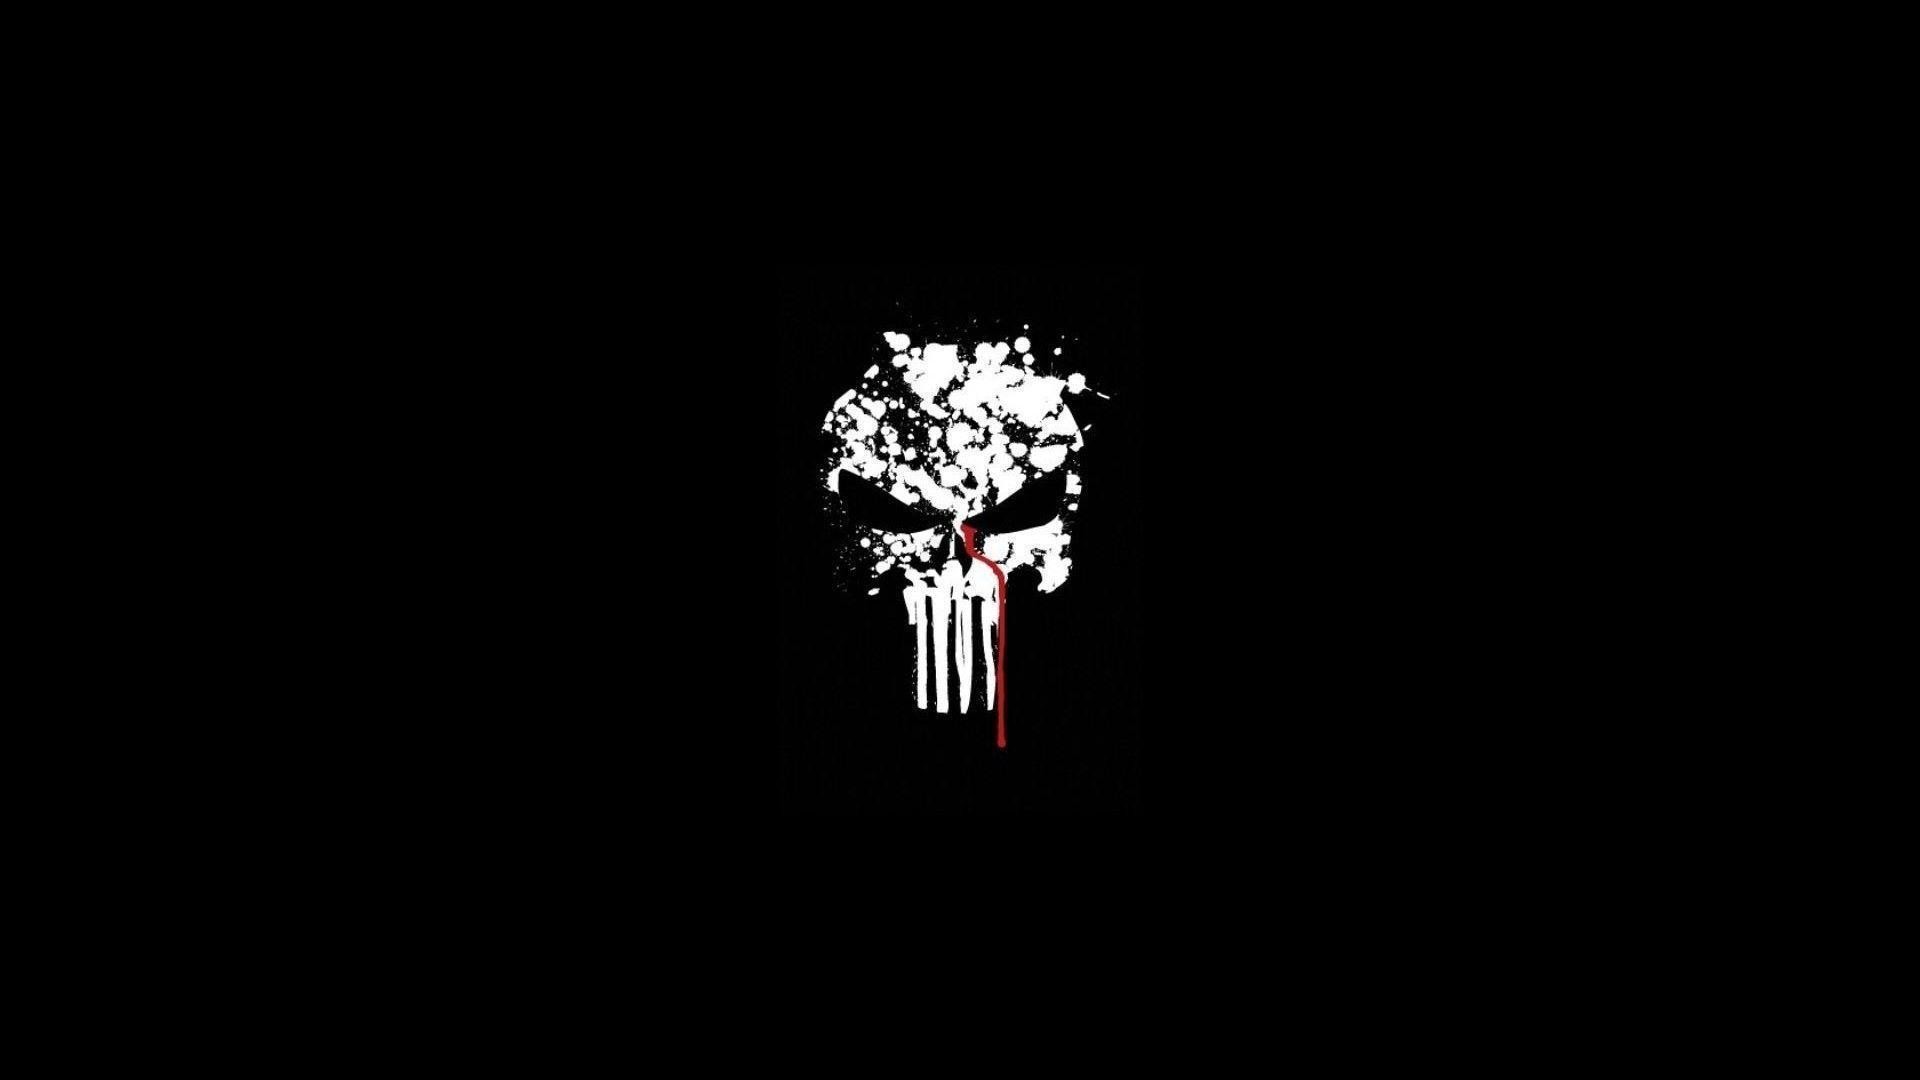 1920x1080 ... The Punisher Wallpapers - Wallpaper Cave marvel comics punisher  #1217842 ...